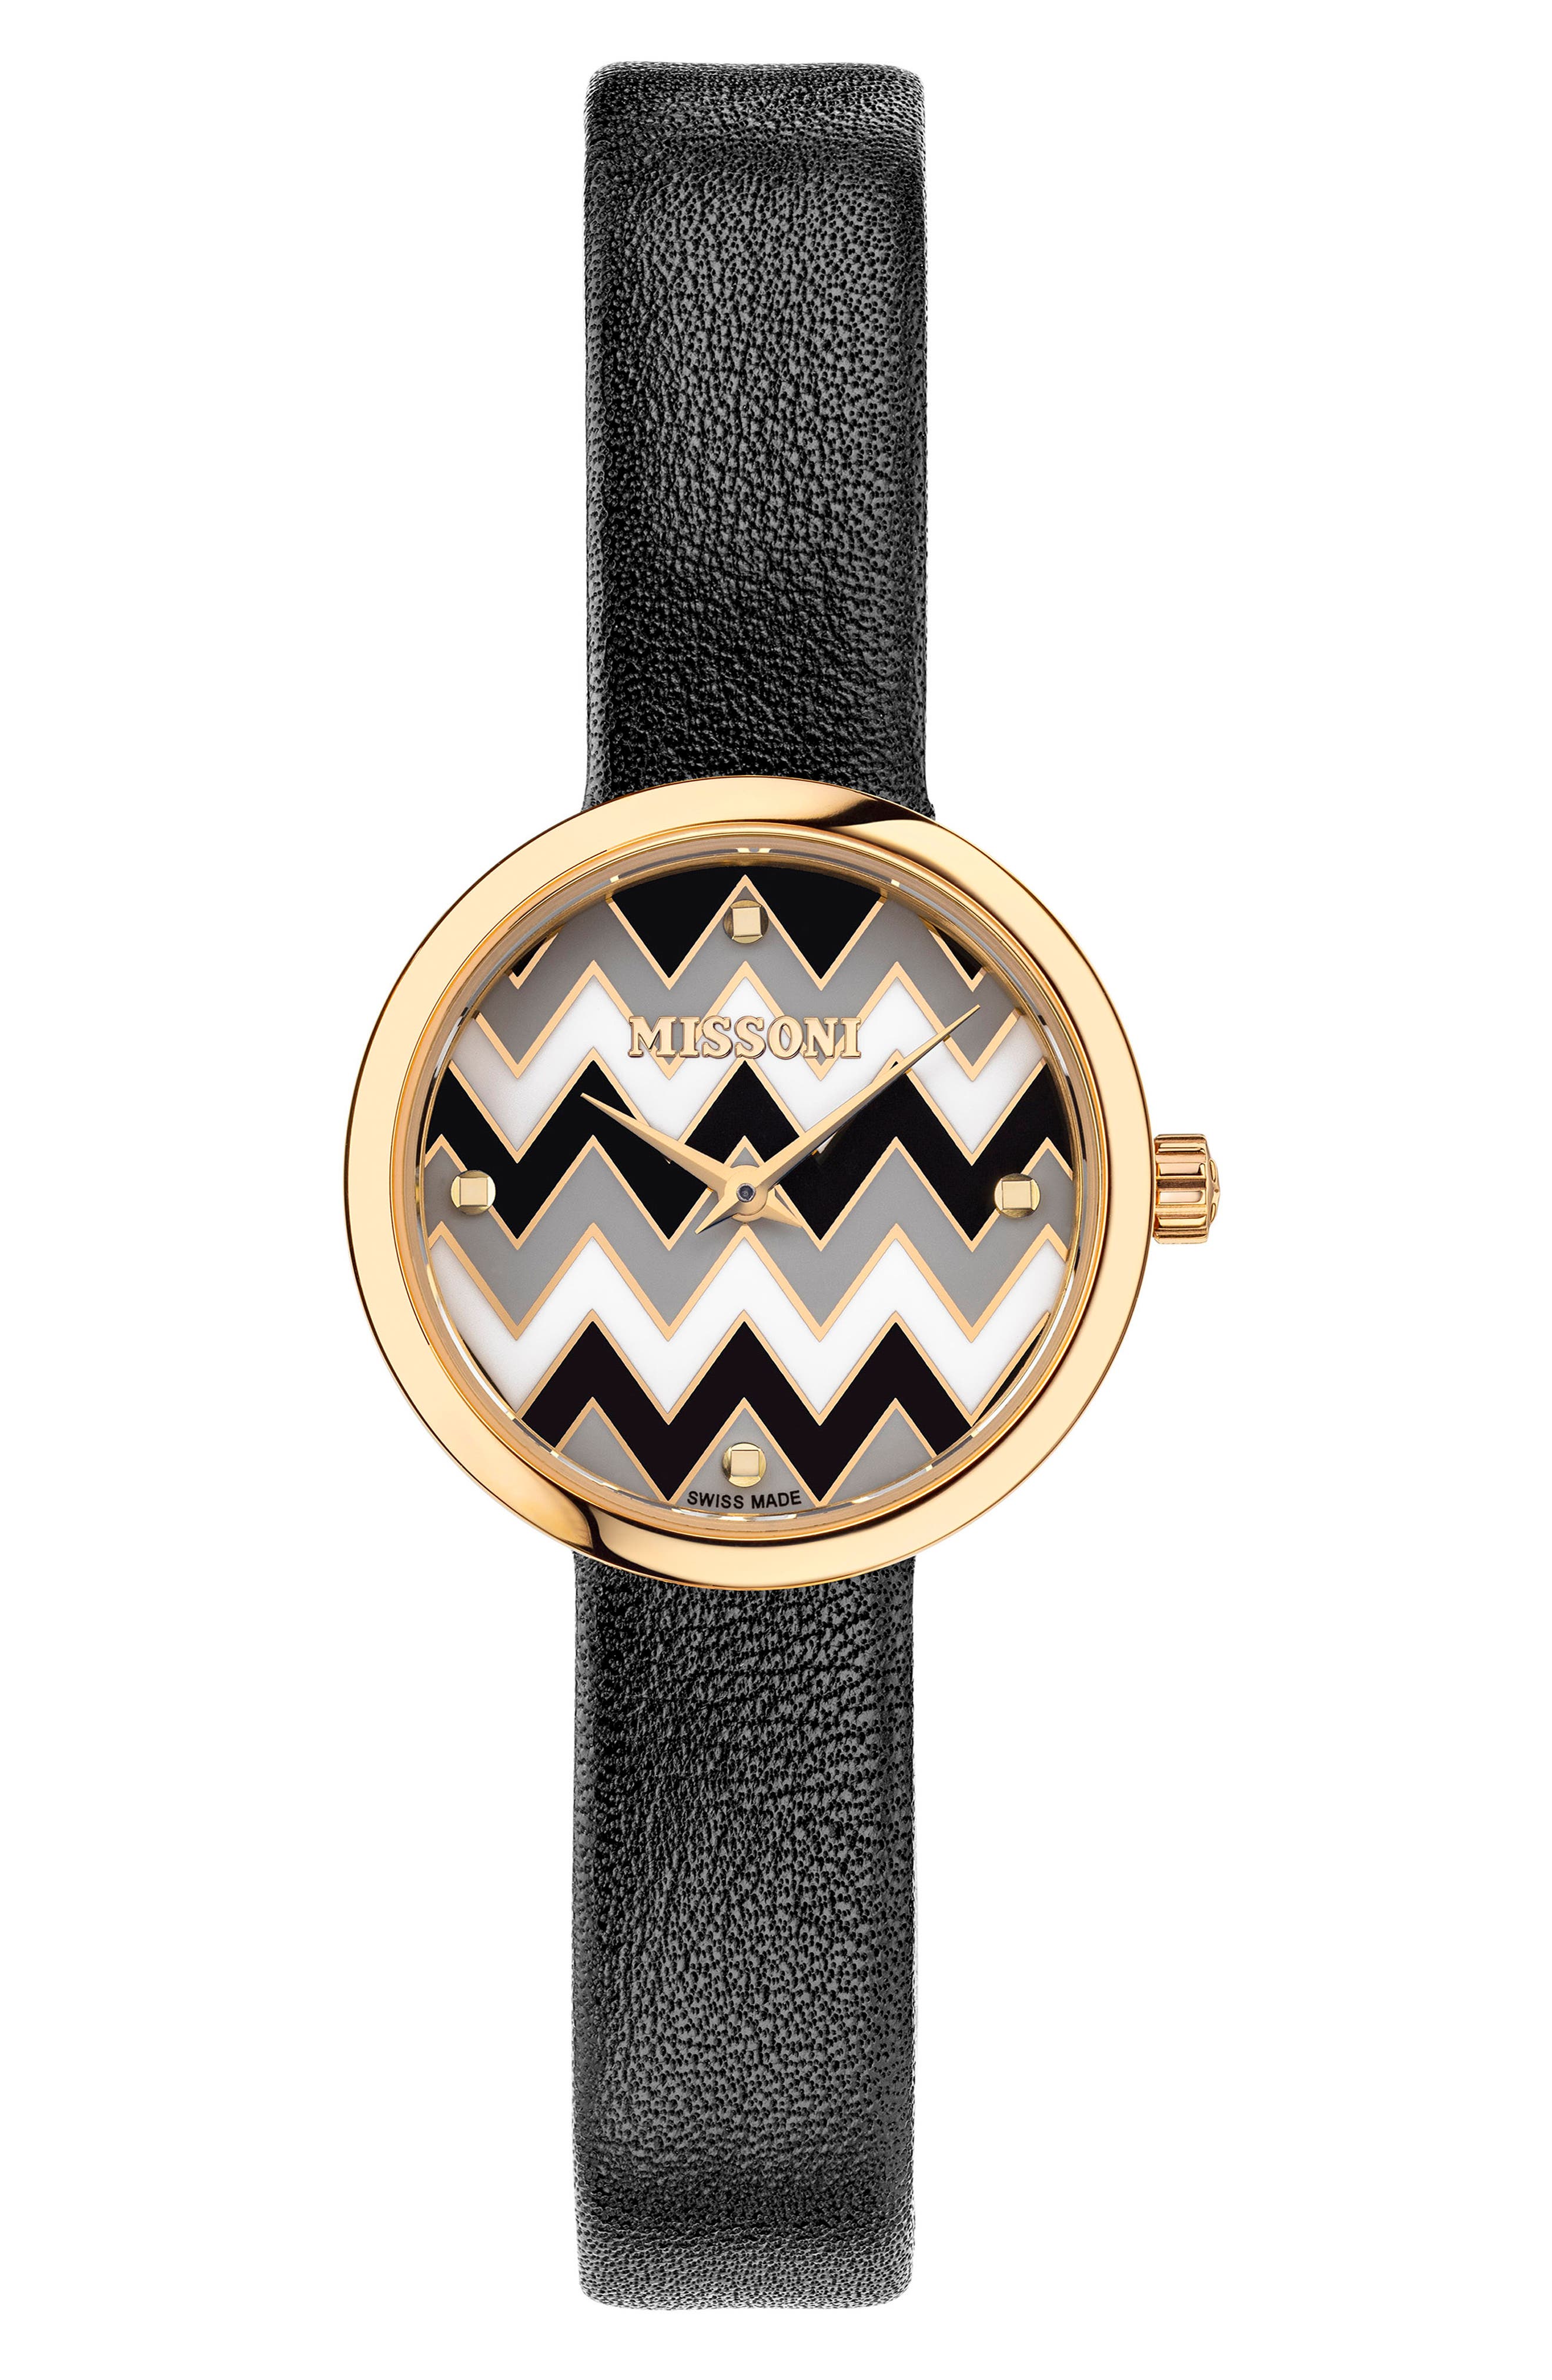 Missoni Multicolor Chevron Dial Leather Strap Watch, 29mm in Ip Yellow Gold at Nordstrom